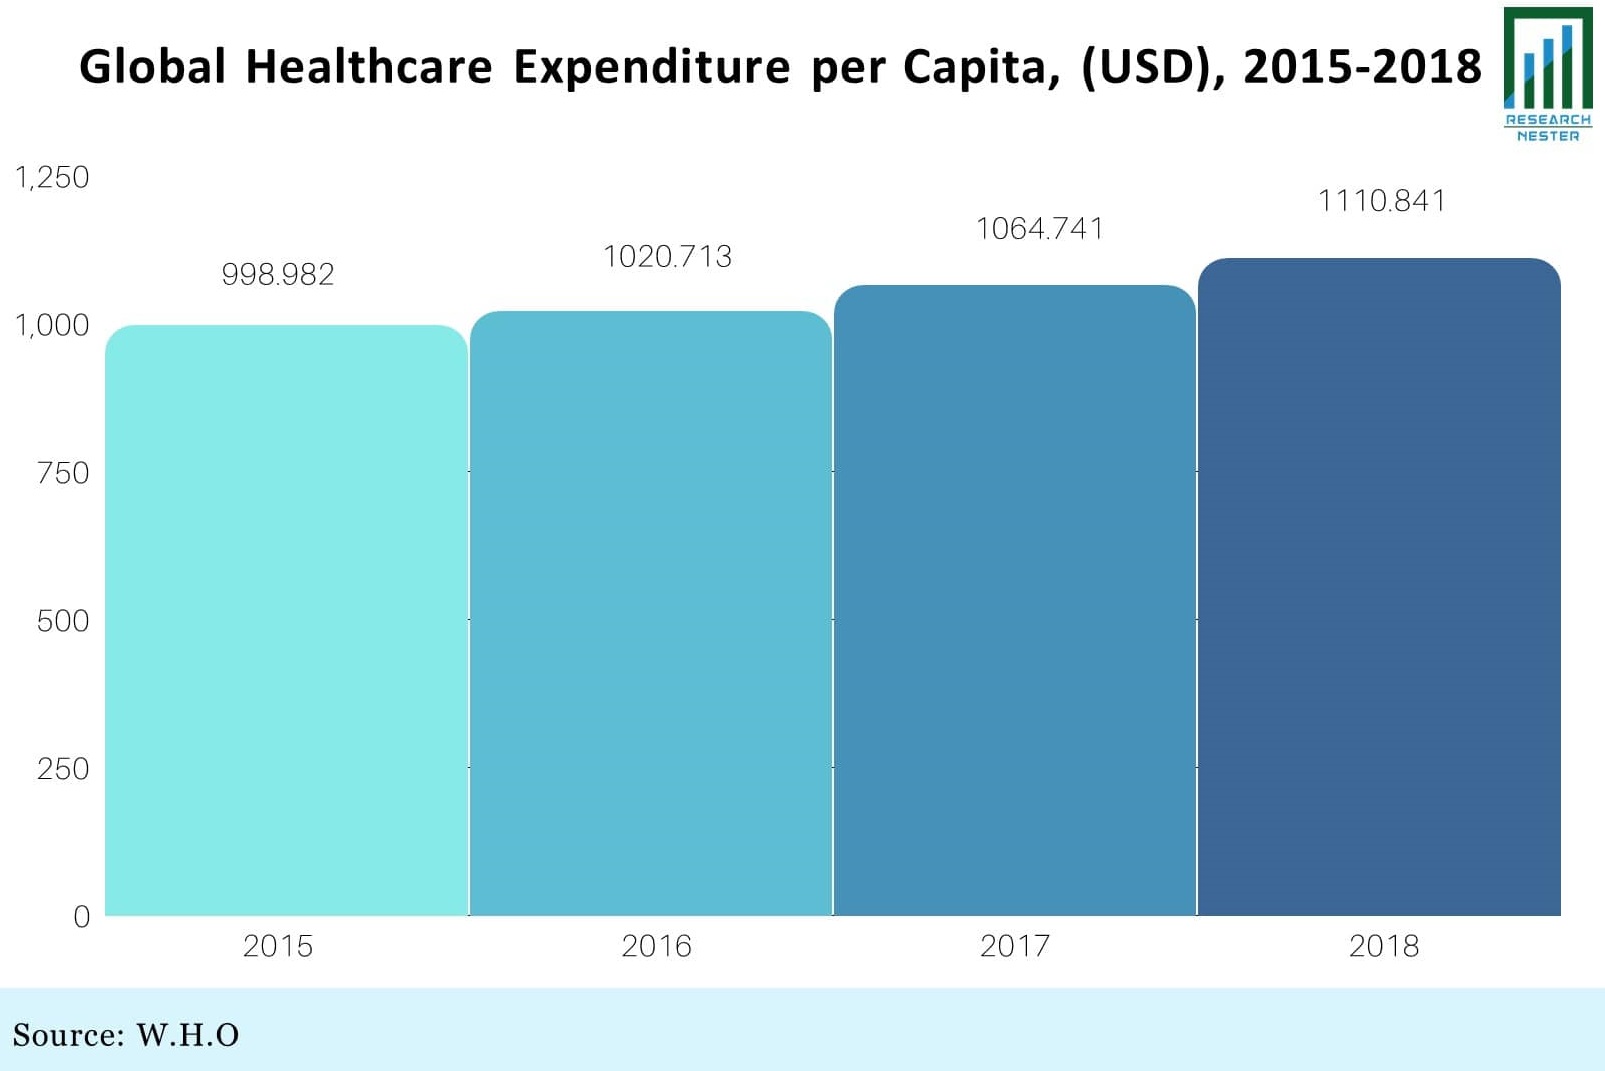 New Healthcare Expenditure Image